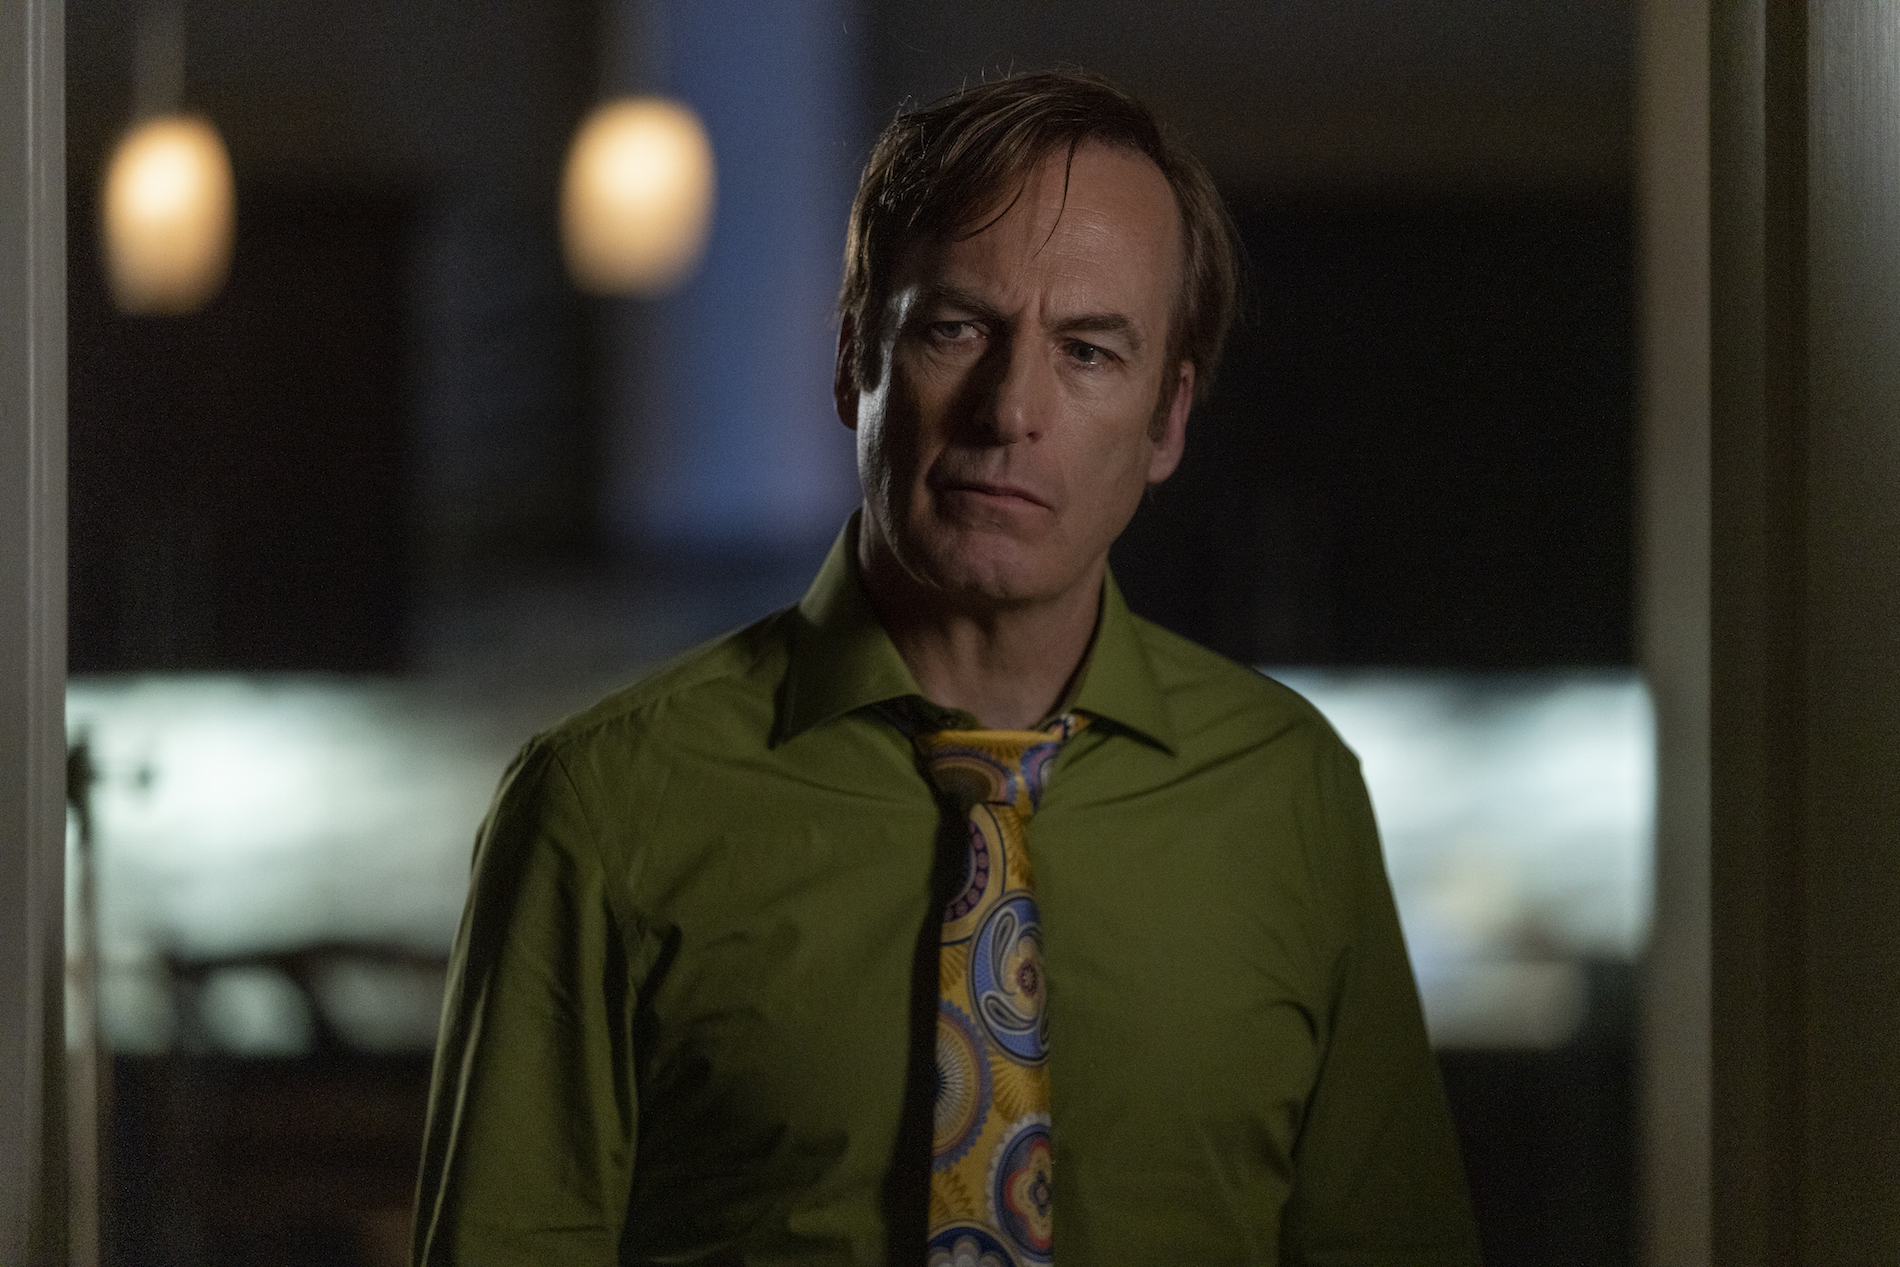 Bob Odenkirk as Jimmy McGill - Better Call Saul _ Season 5, Episode 5 - Photo Credit: Greg Lewis/AMC/Sony Pictures Television